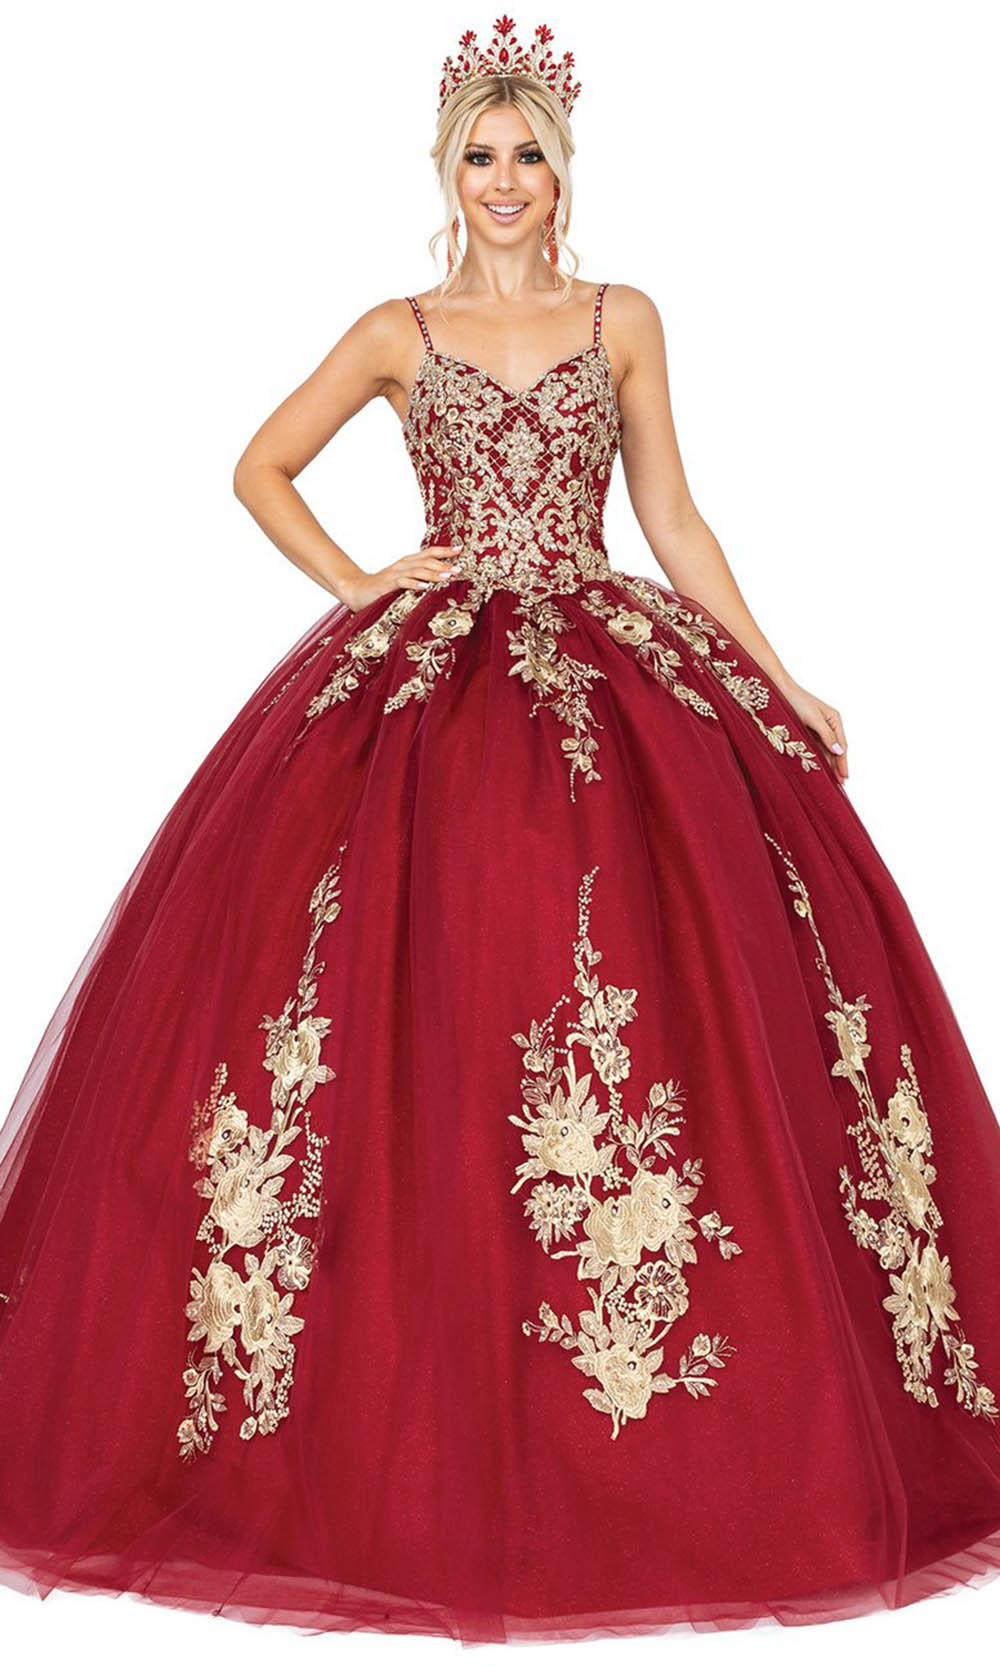 Burgundy Dancing Queen - 1544 Embroidery Lace Applique Lace-Up Back  Ballgown | Long Ballgown Dress – 